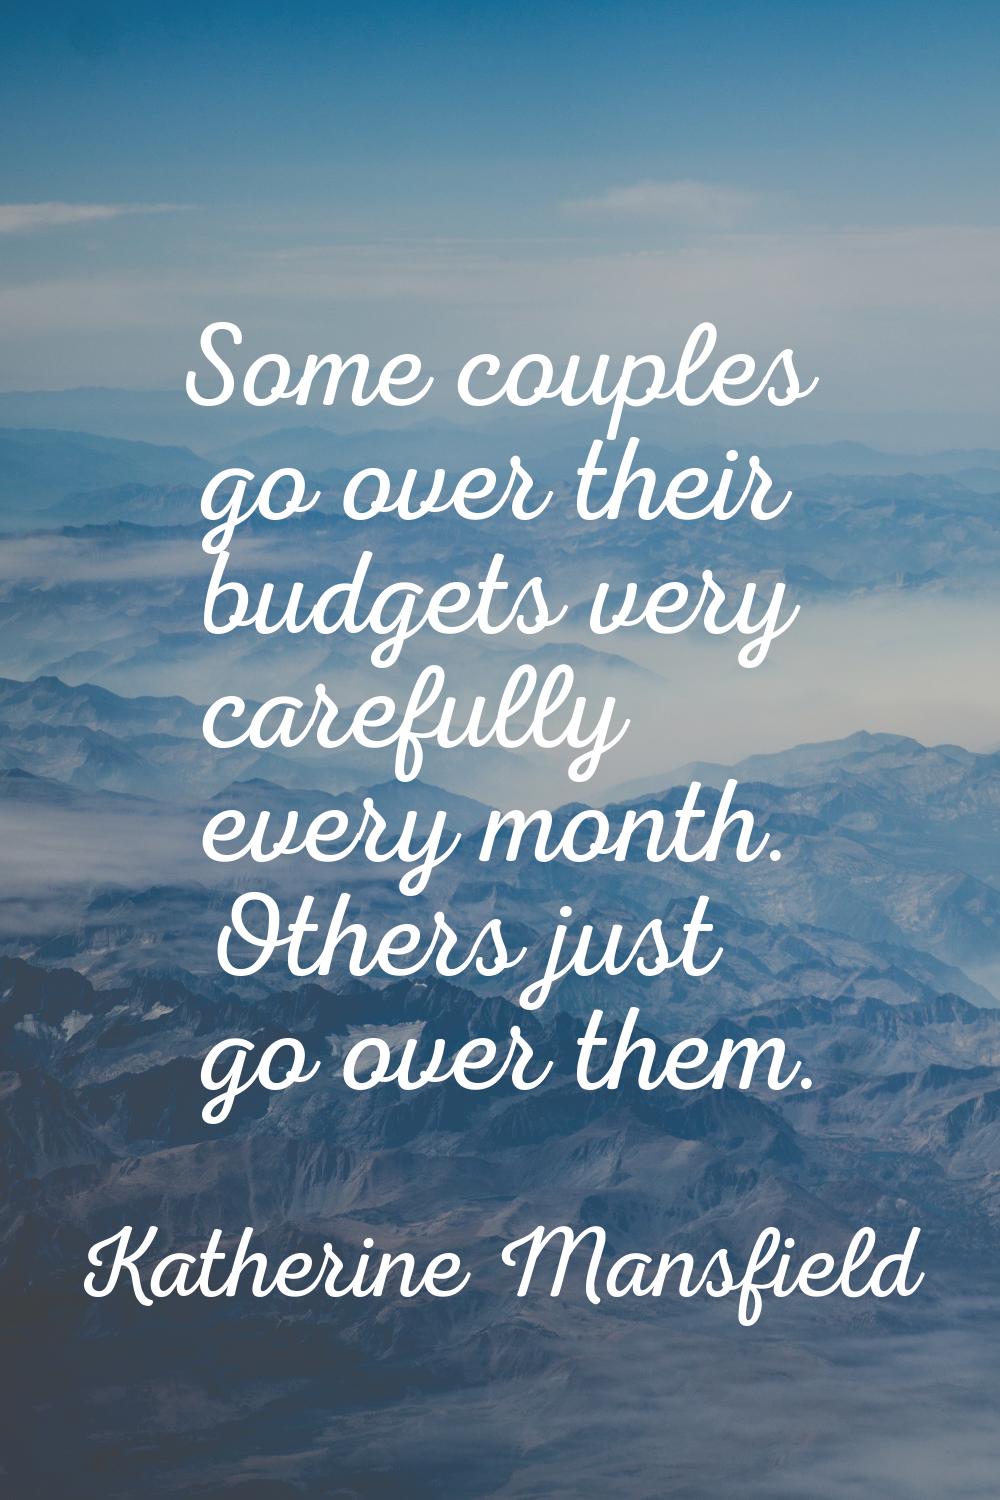 Some couples go over their budgets very carefully every month. Others just go over them.